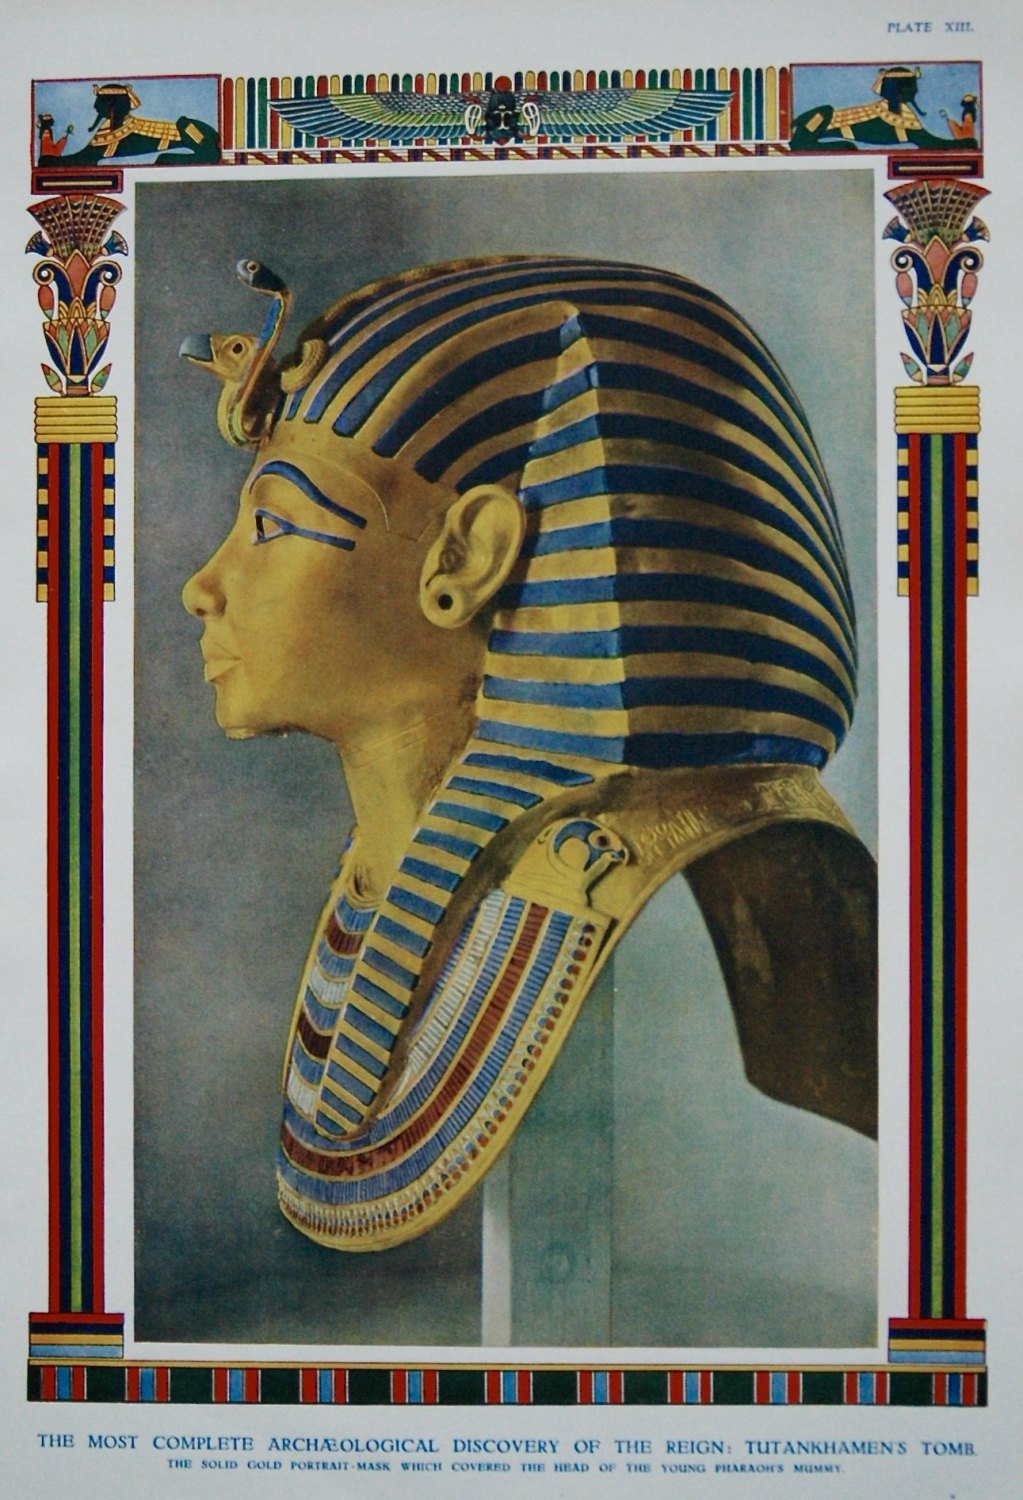 Tutankhamen's Tomb : Solid Gold Portrait-Mask which covered the Head of the